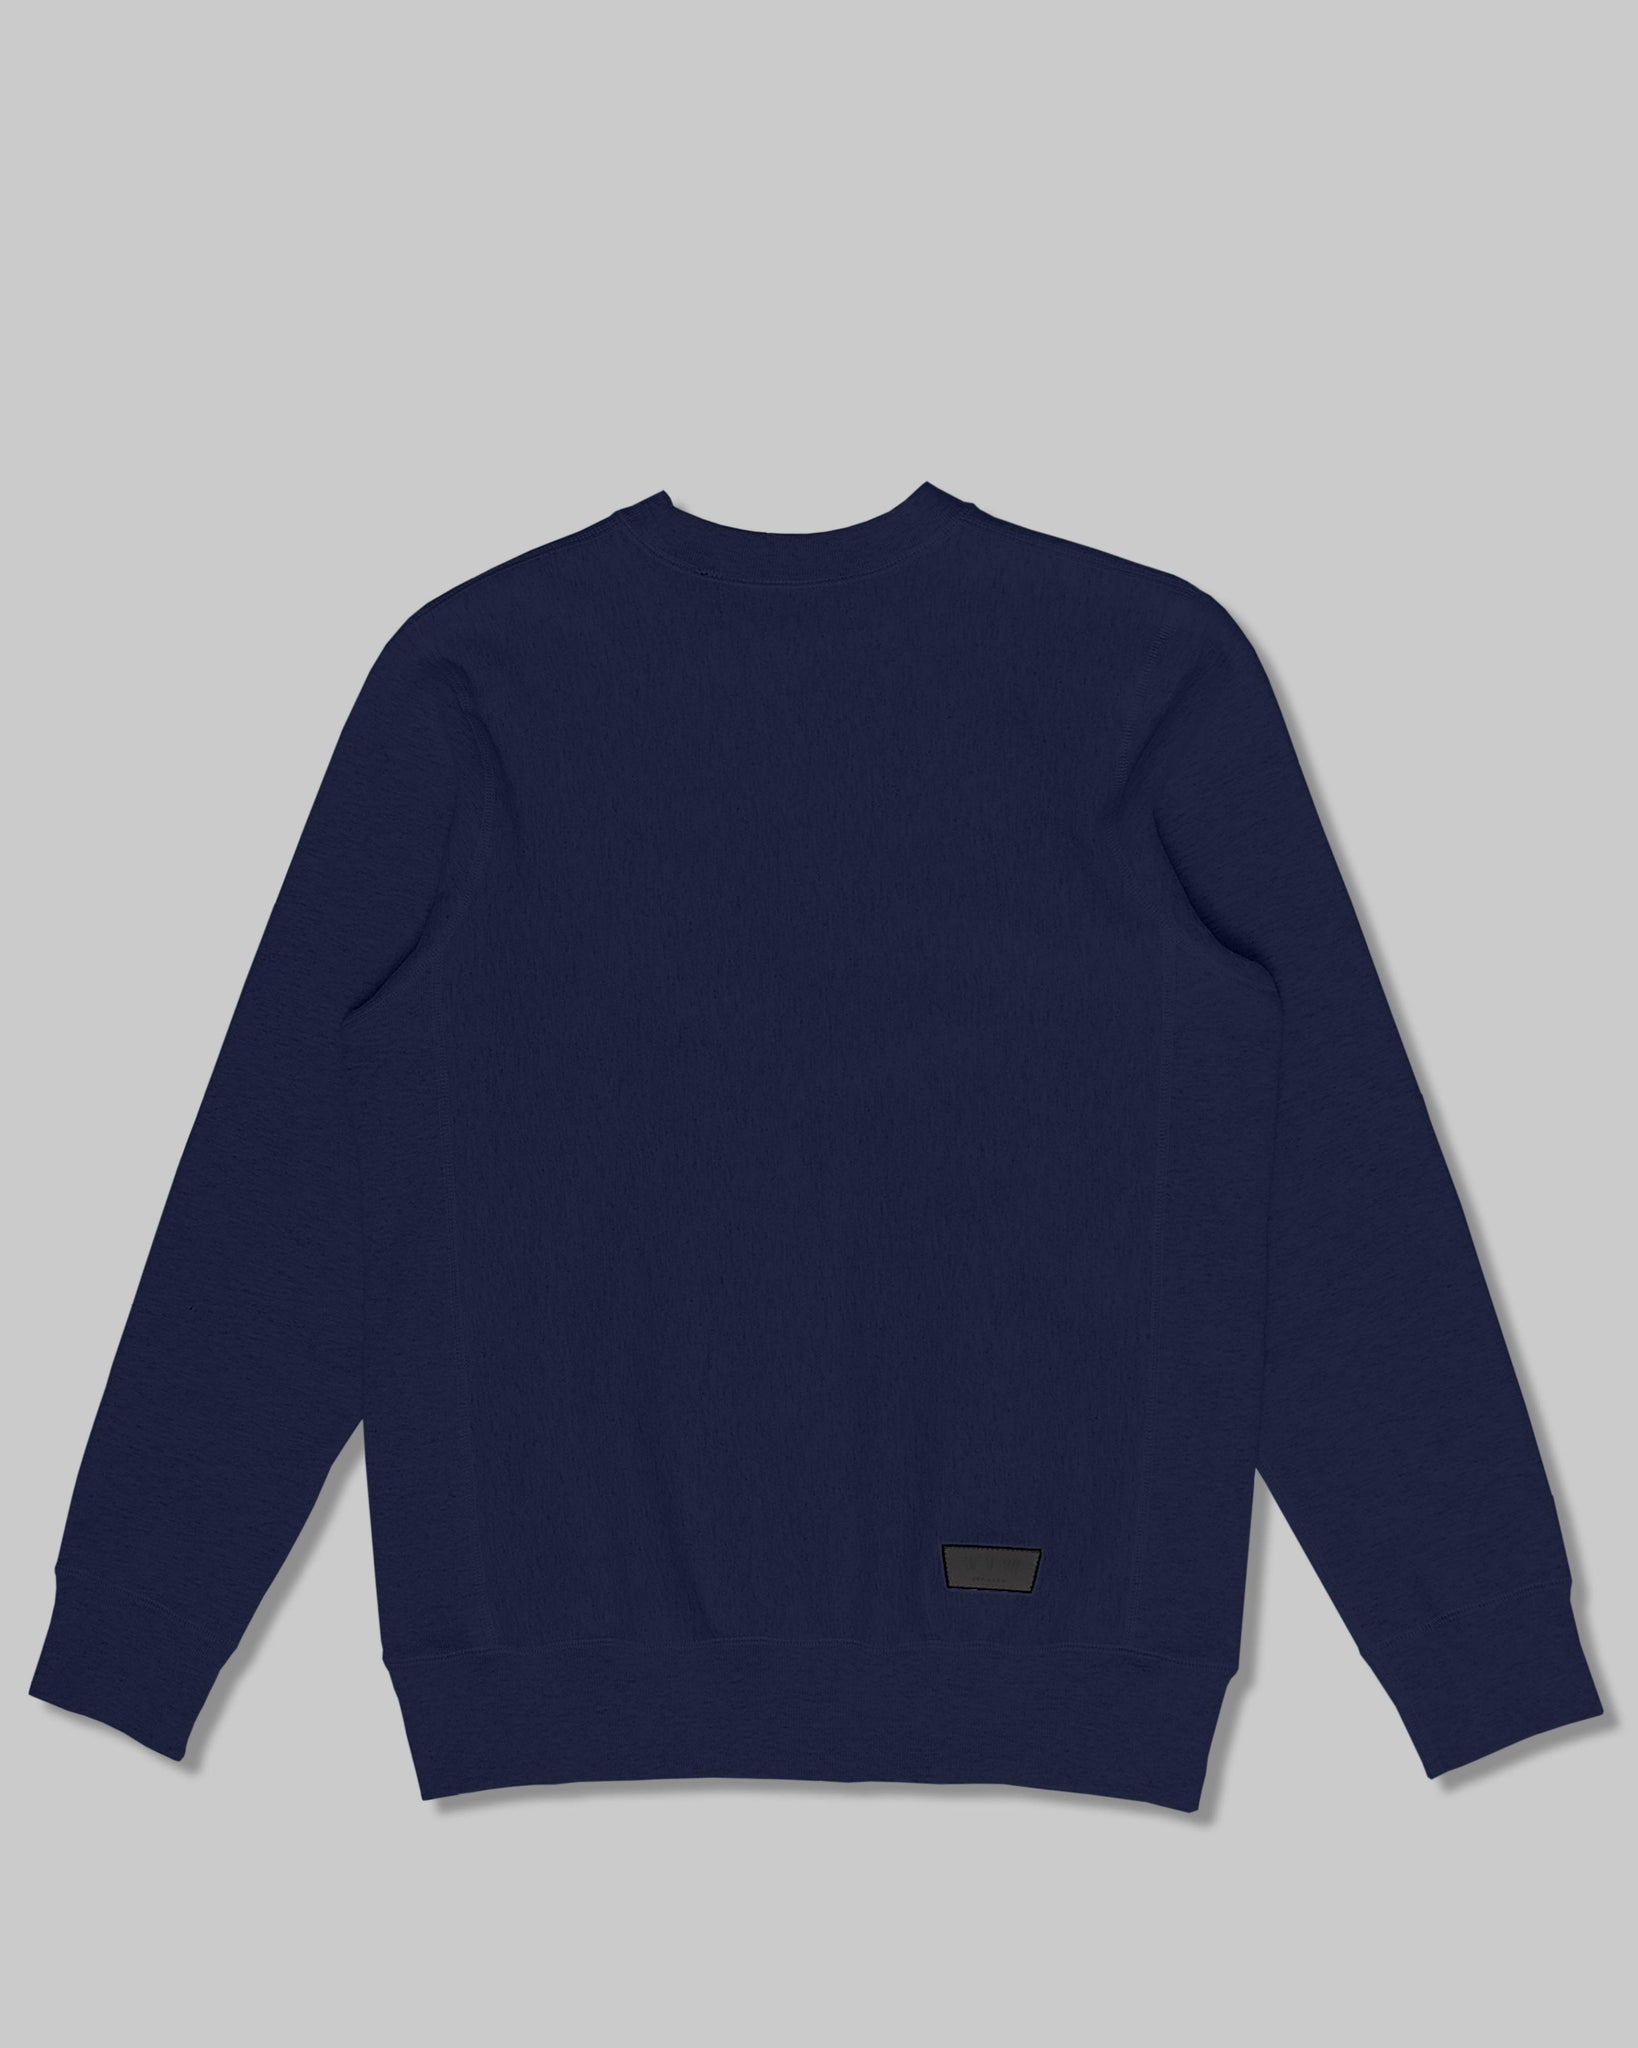 Crewneck in Heavyweight American Cotton - 457 ANEW | Atelier IV V VII Inc.